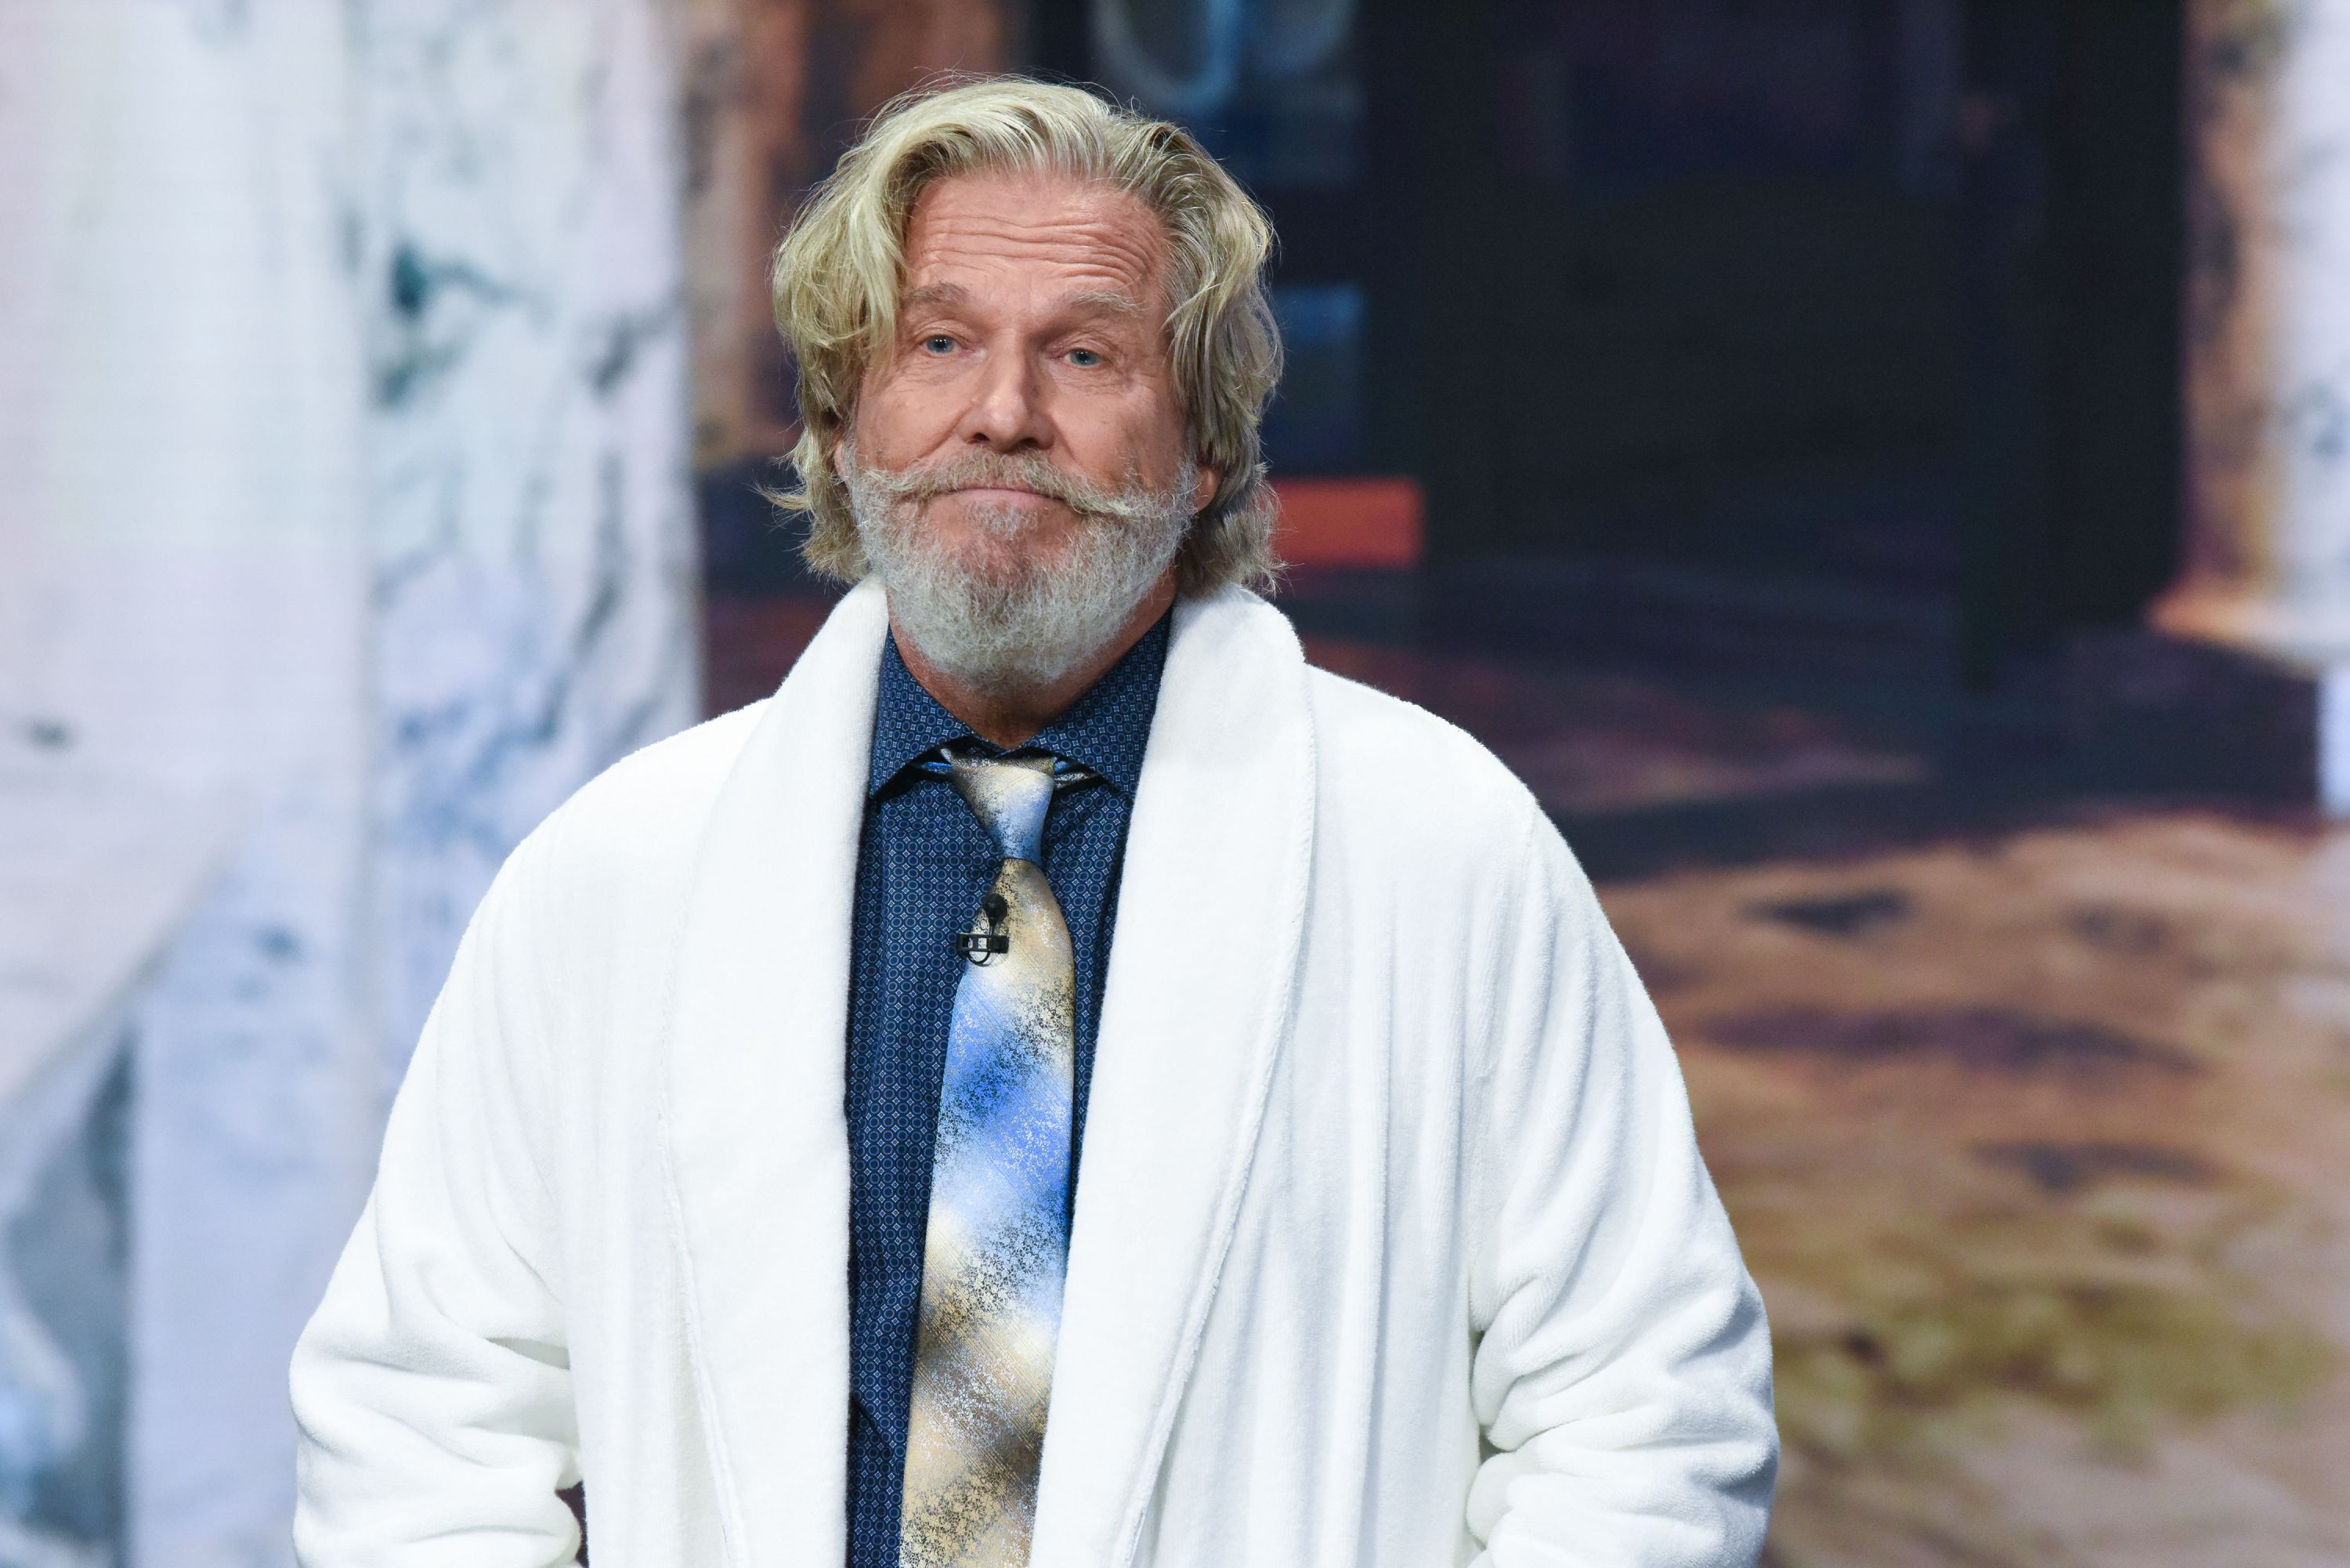 Jeff Bridges as a guest on "The Late Show with Stephen Colbert" on September 28, 2018 | Photo: Scott Kowalchyk/CBS/Getty Images